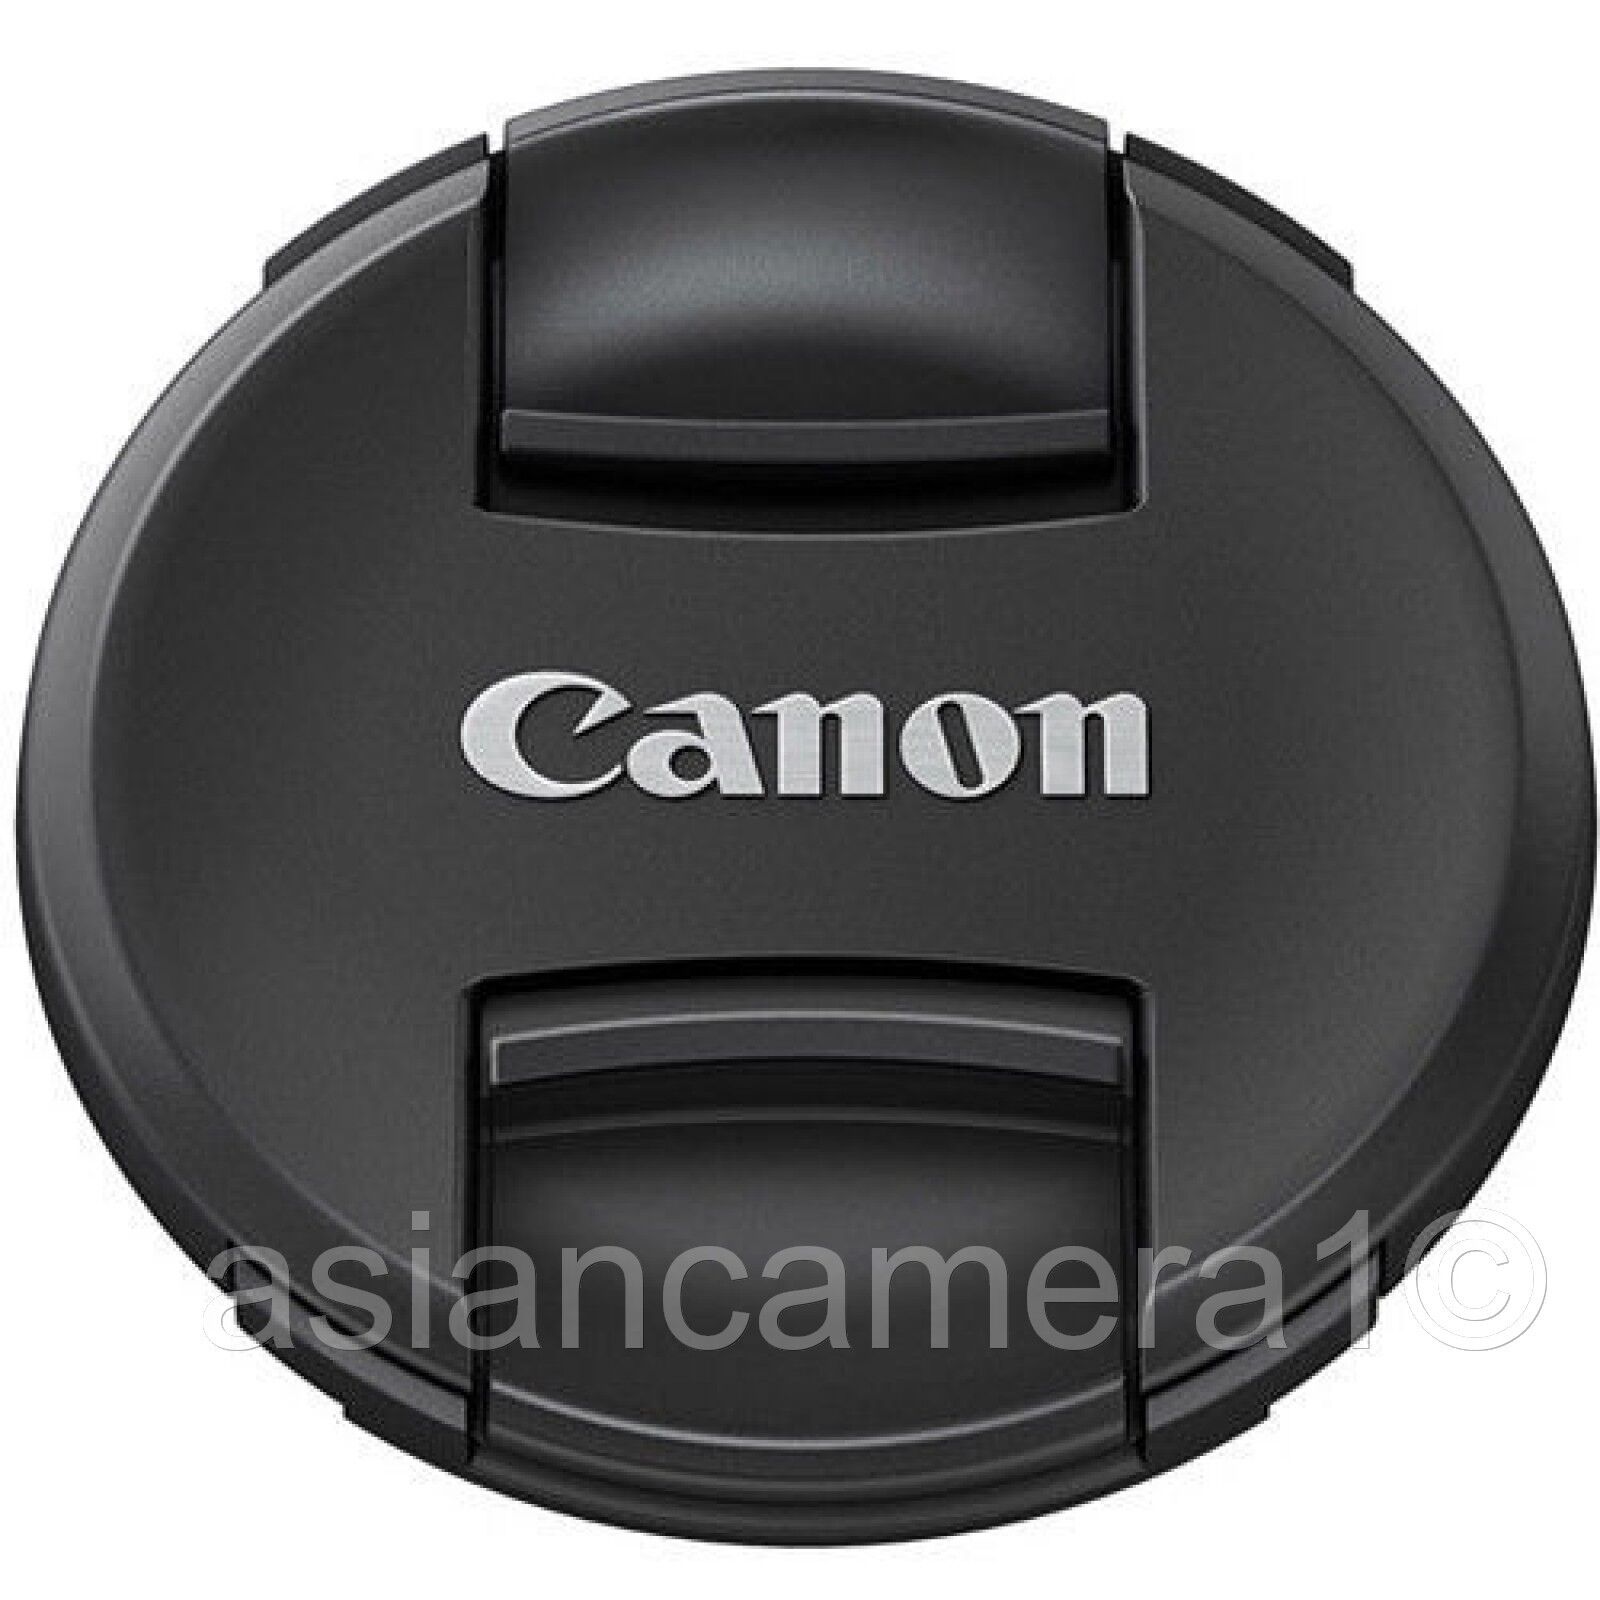 77mm Snap-on Replacement Front Lens Cap Dust Safety Cover For Ca